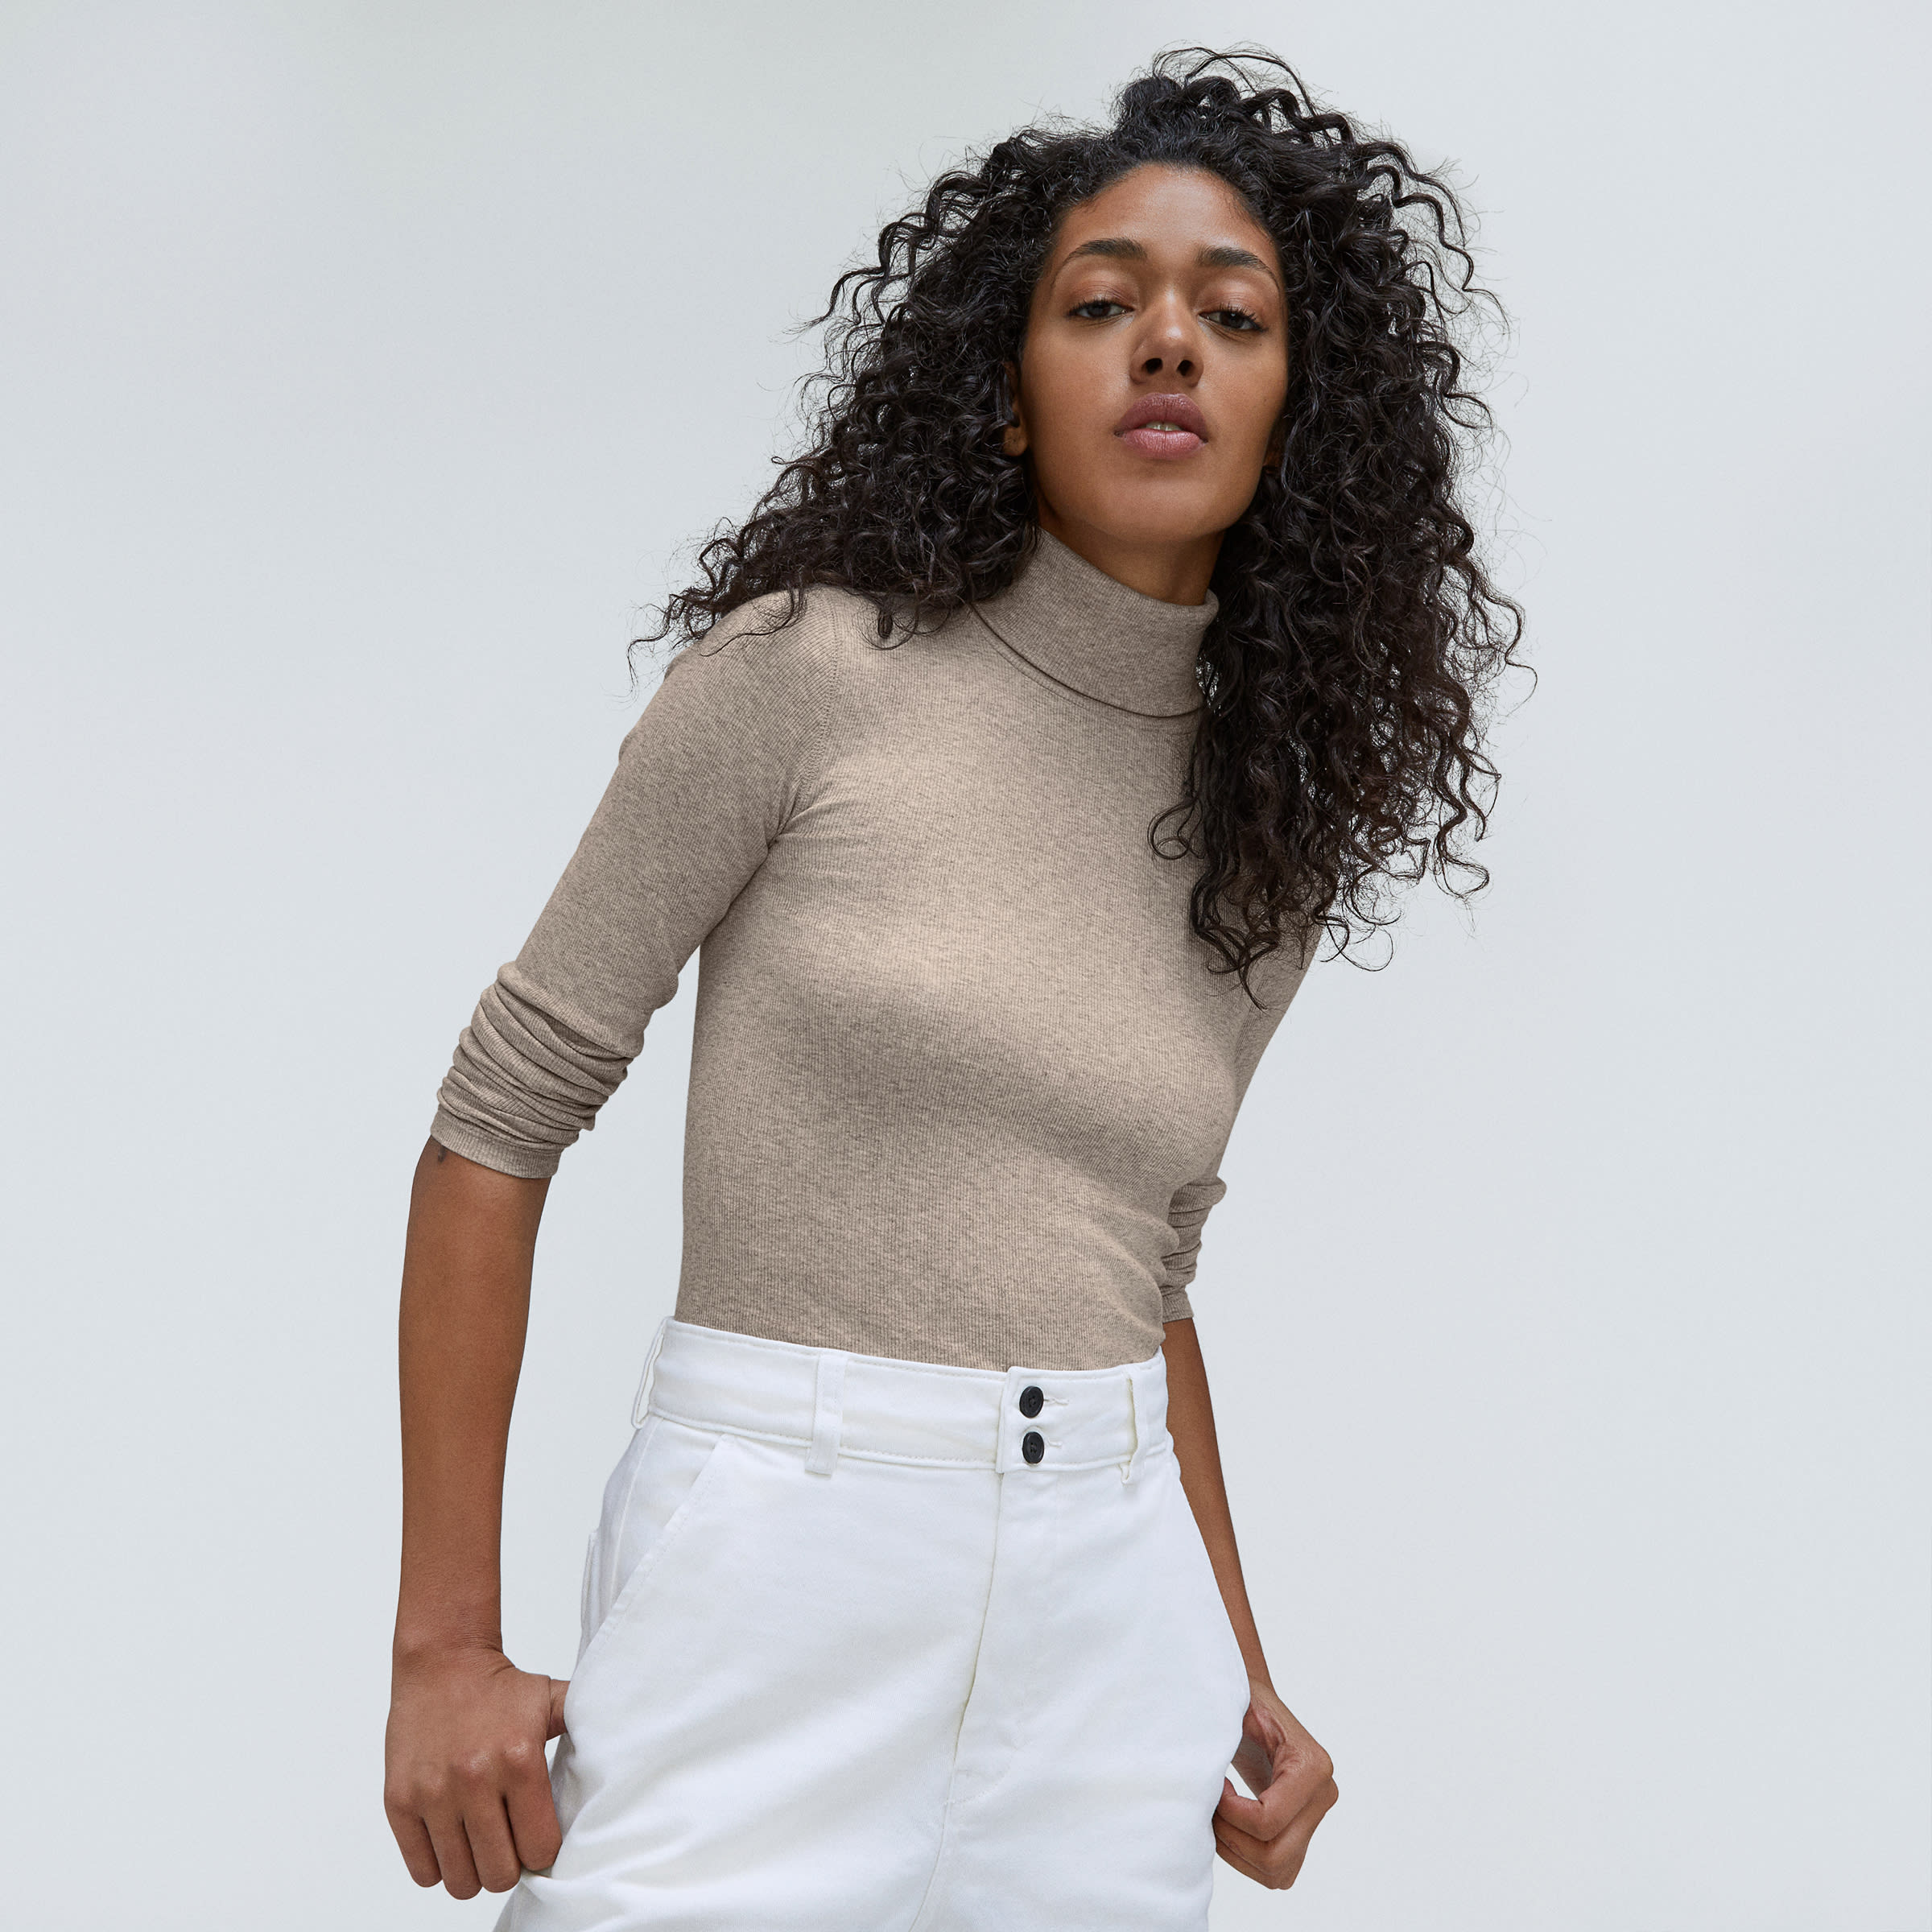 A Tissue Turtleneck Shirt Is the Affordable Essential Your Closet Needs